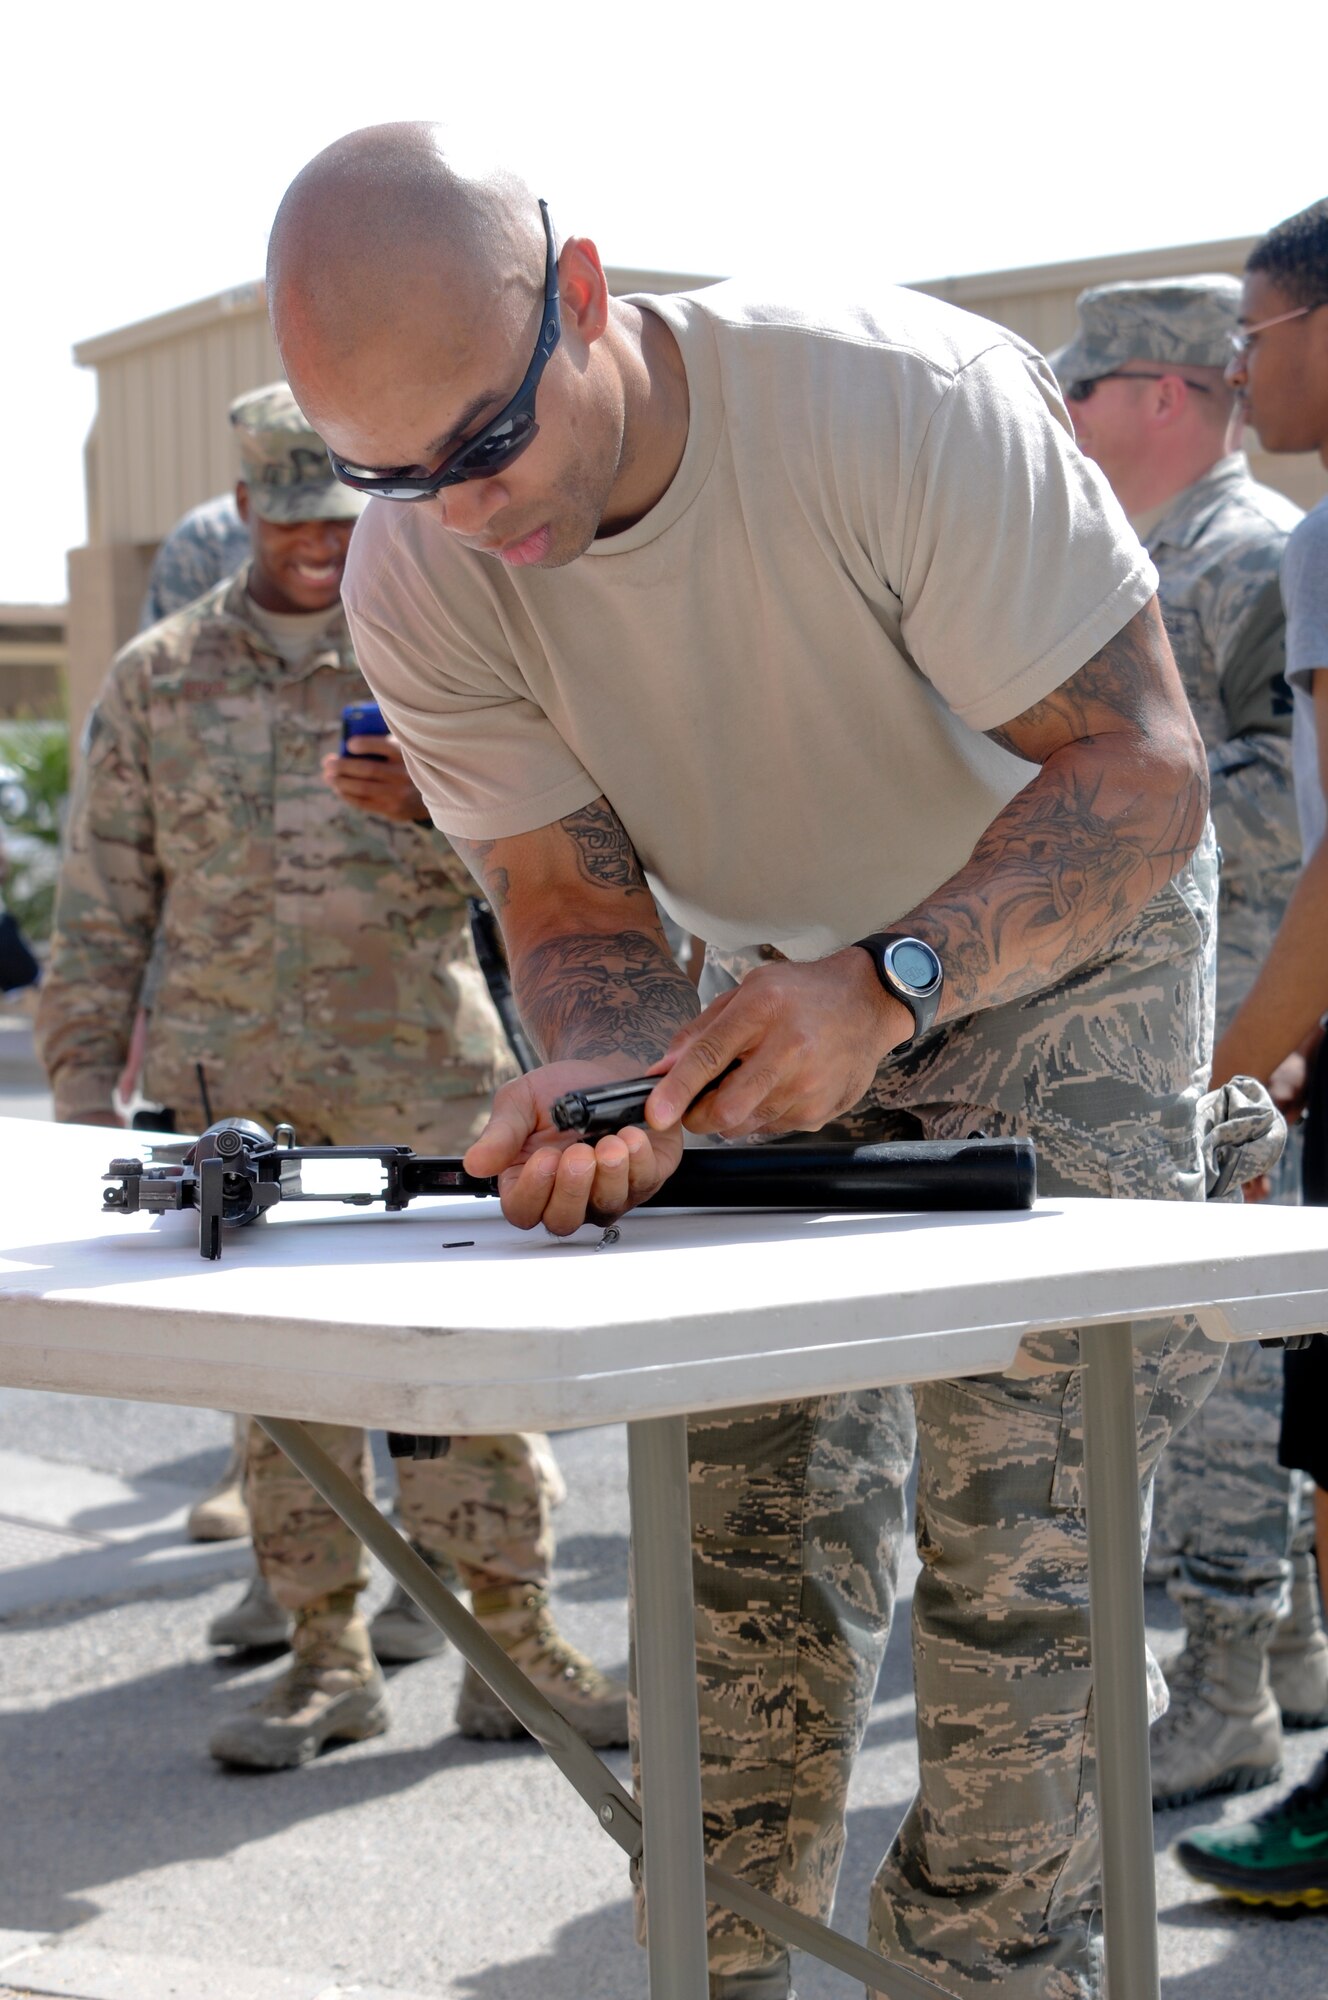 Tech. Sgt. Chris Ducre, 386th Expeditionary Security Forces Squadron, races to assemble an M-4 Carbine weapon during a relay event as a part of the Battle of the Badges held June 21, 2014. Military members who wear a badge for military police, fire department or explosive ordinance disposal competed against other military members in multiple events including a ruck march, MRAP pull and relay race to earn the title of best badge wearer. (U.S. Air Force photo by 1st Lt. Holli Nelson)